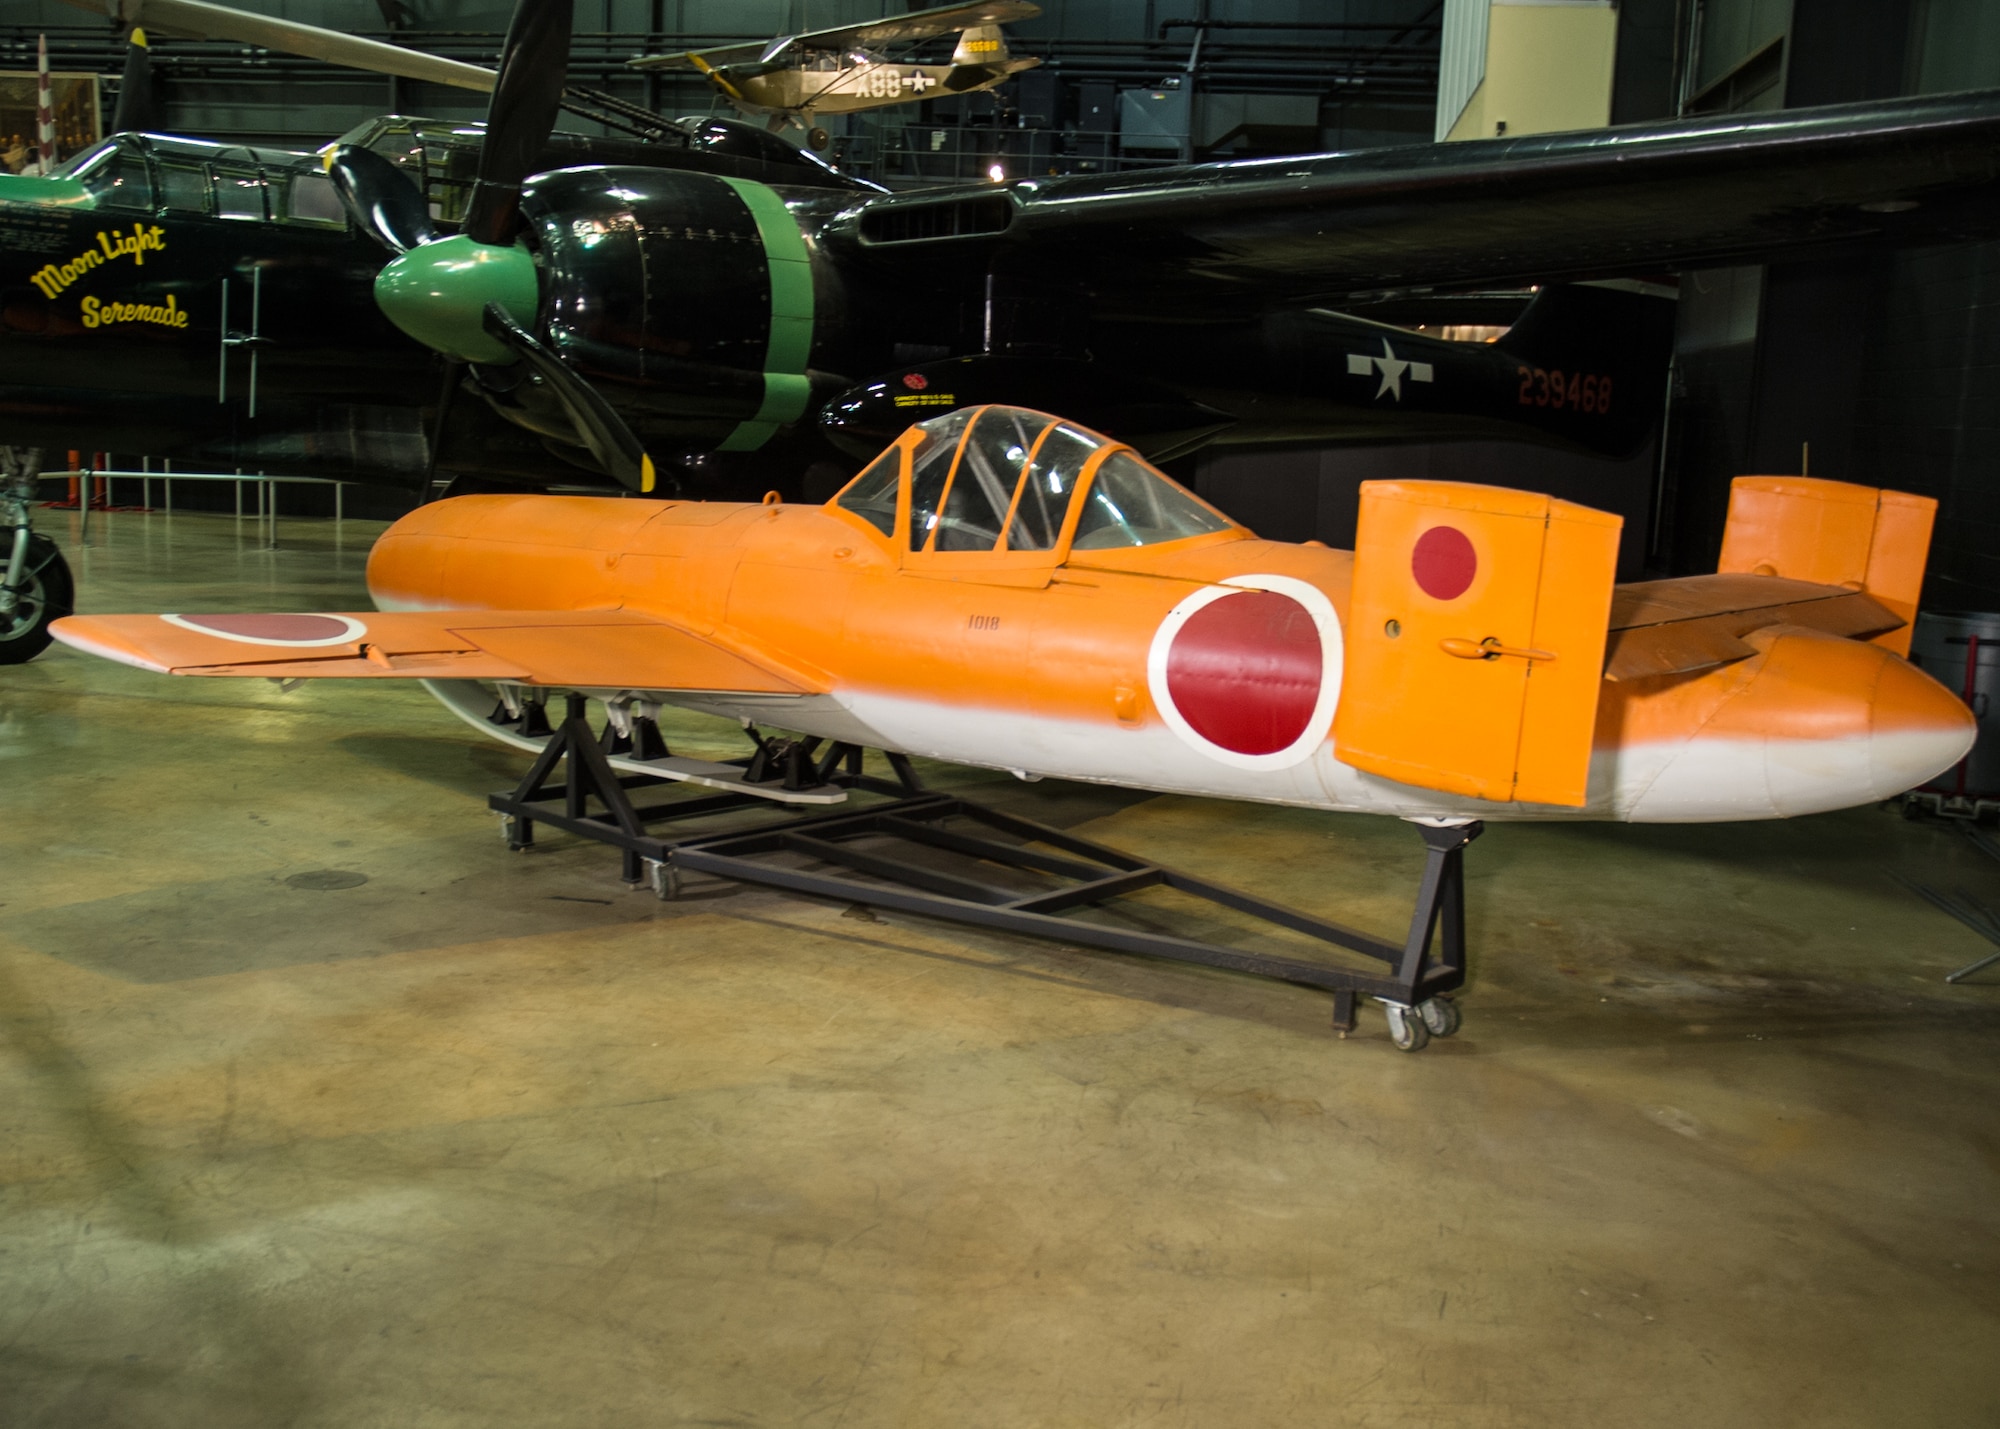 Yokosuka MXY7-K1 Ohka Trainer in the World War II Gallery at the National Museum of the United States Air Force. (U.S. Air Force photo by Ken LaRock)